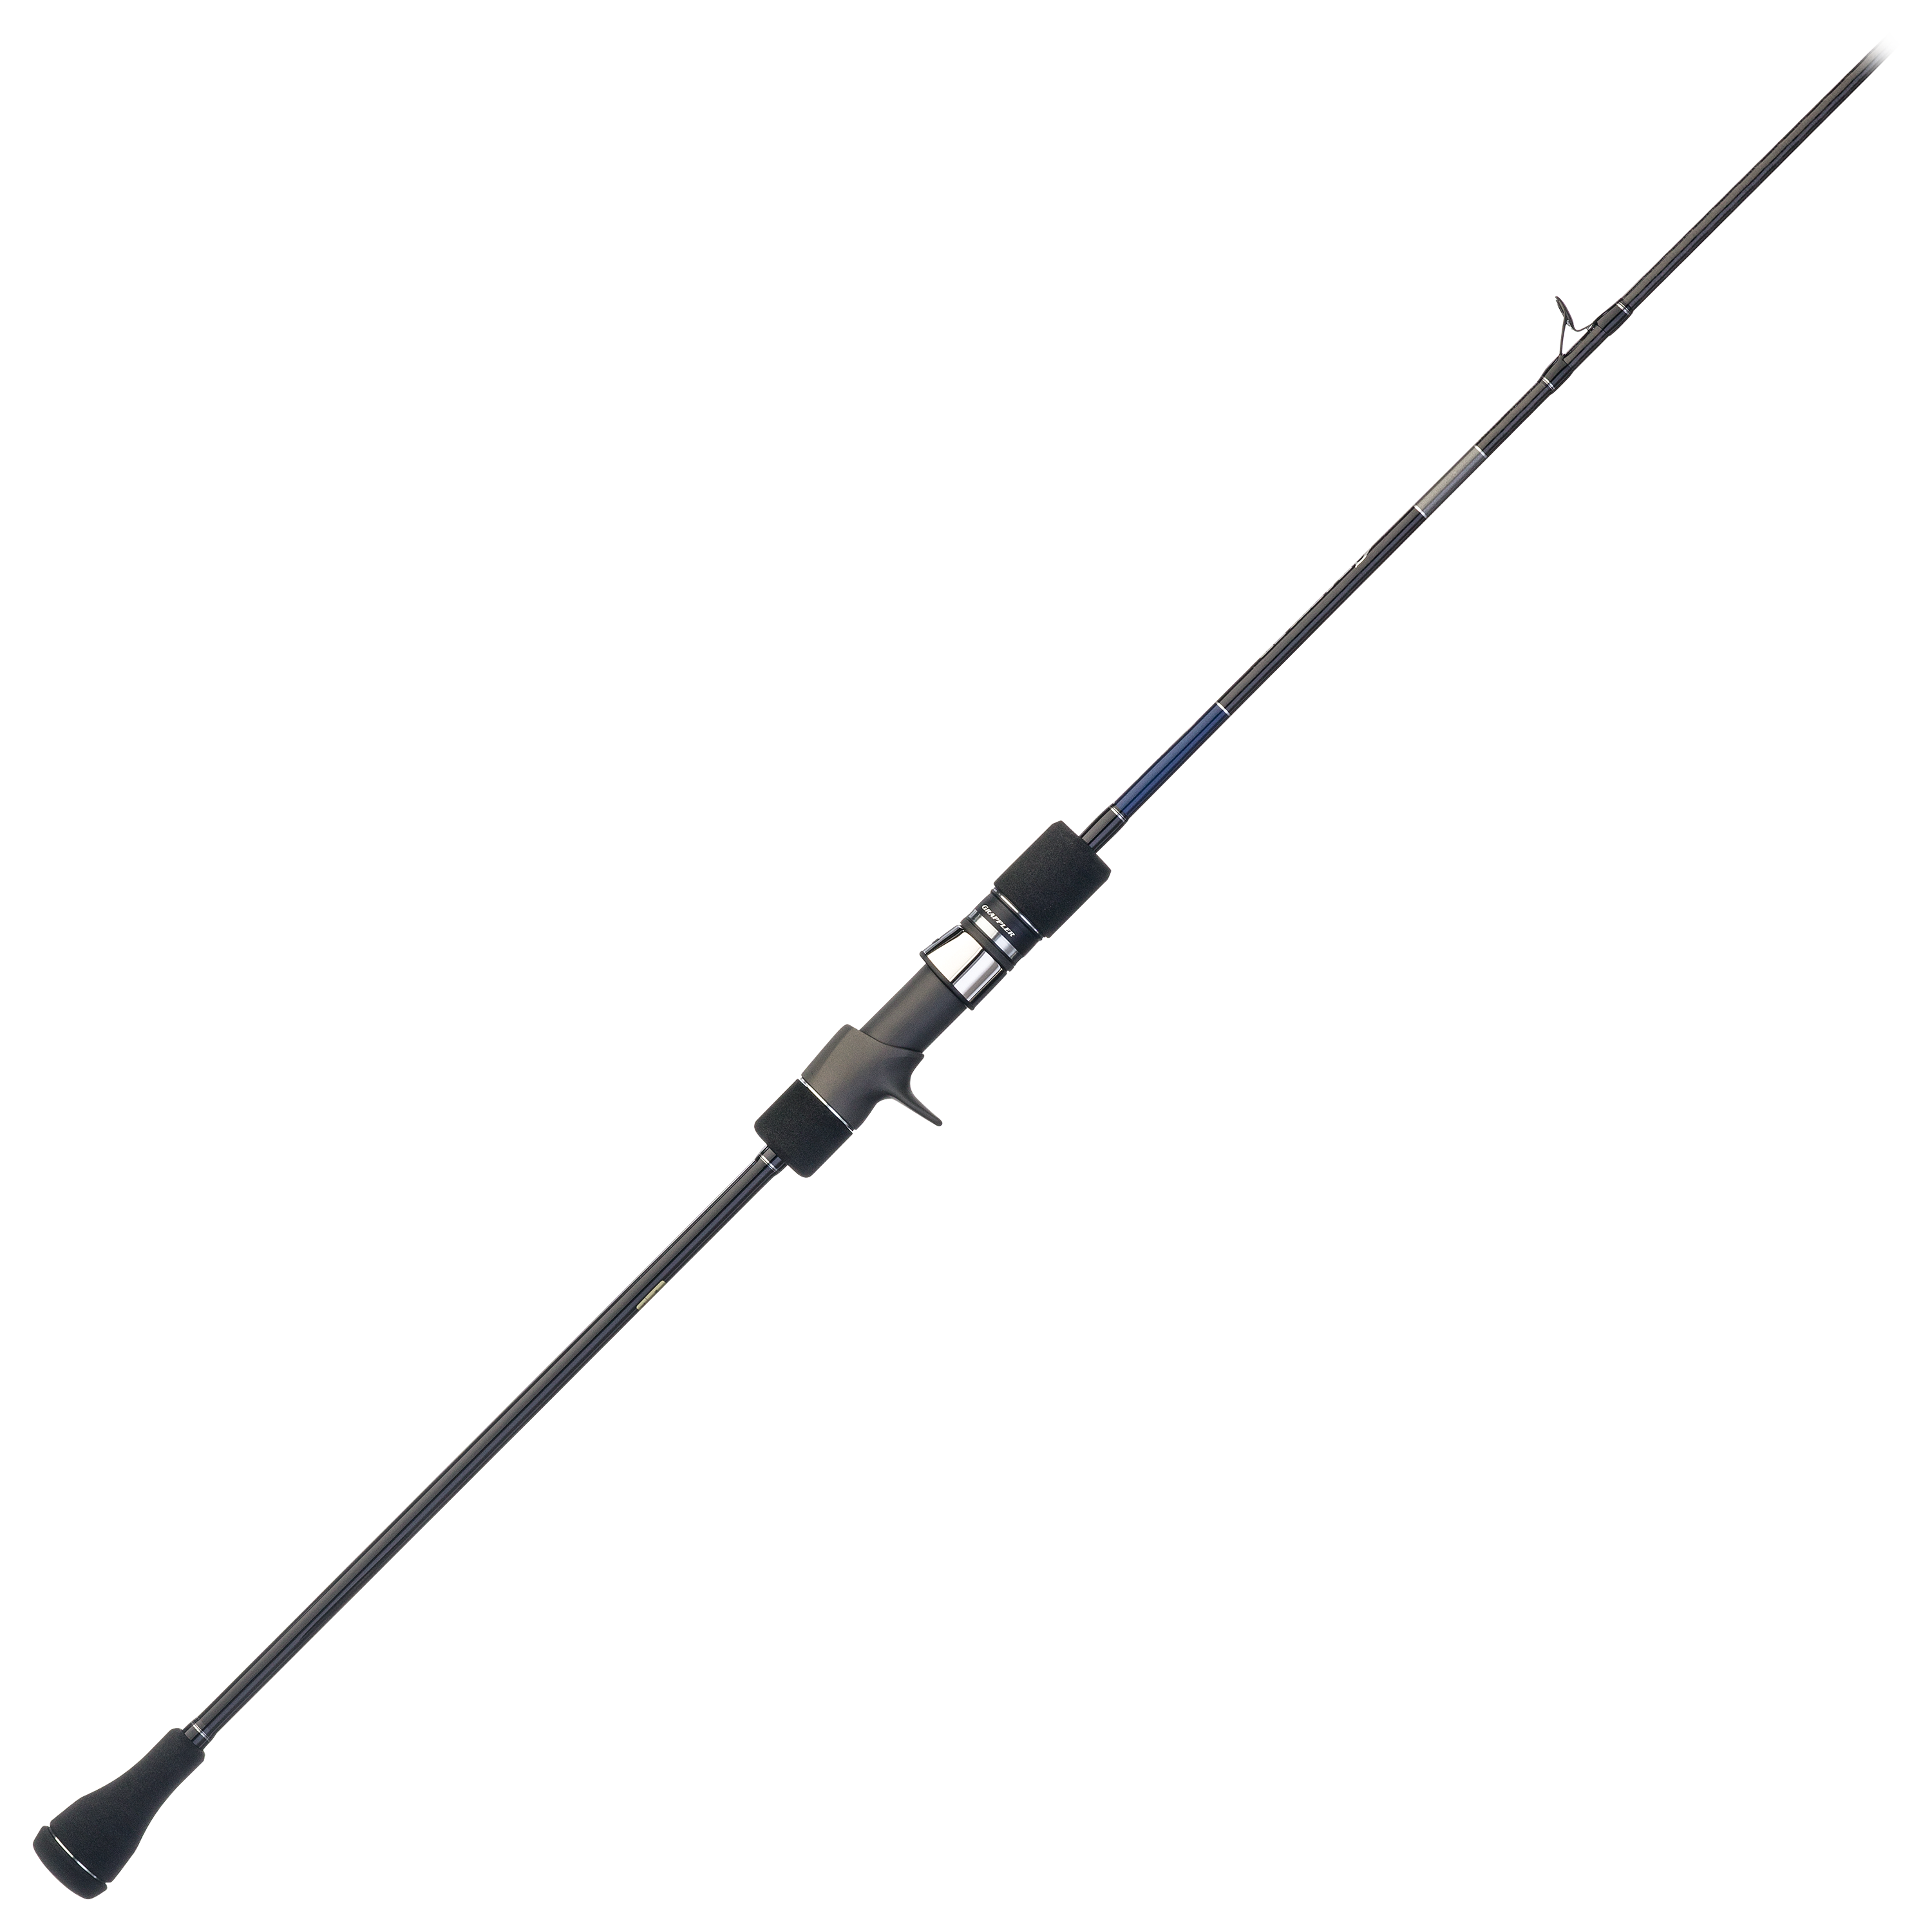 Grappler Type J Saltwater Conventional Jigging Fishing Rods, Moderate-Fast  Action, Spiral-X and Hi-Power X Construction, Fuji Alconite Guides and SiC